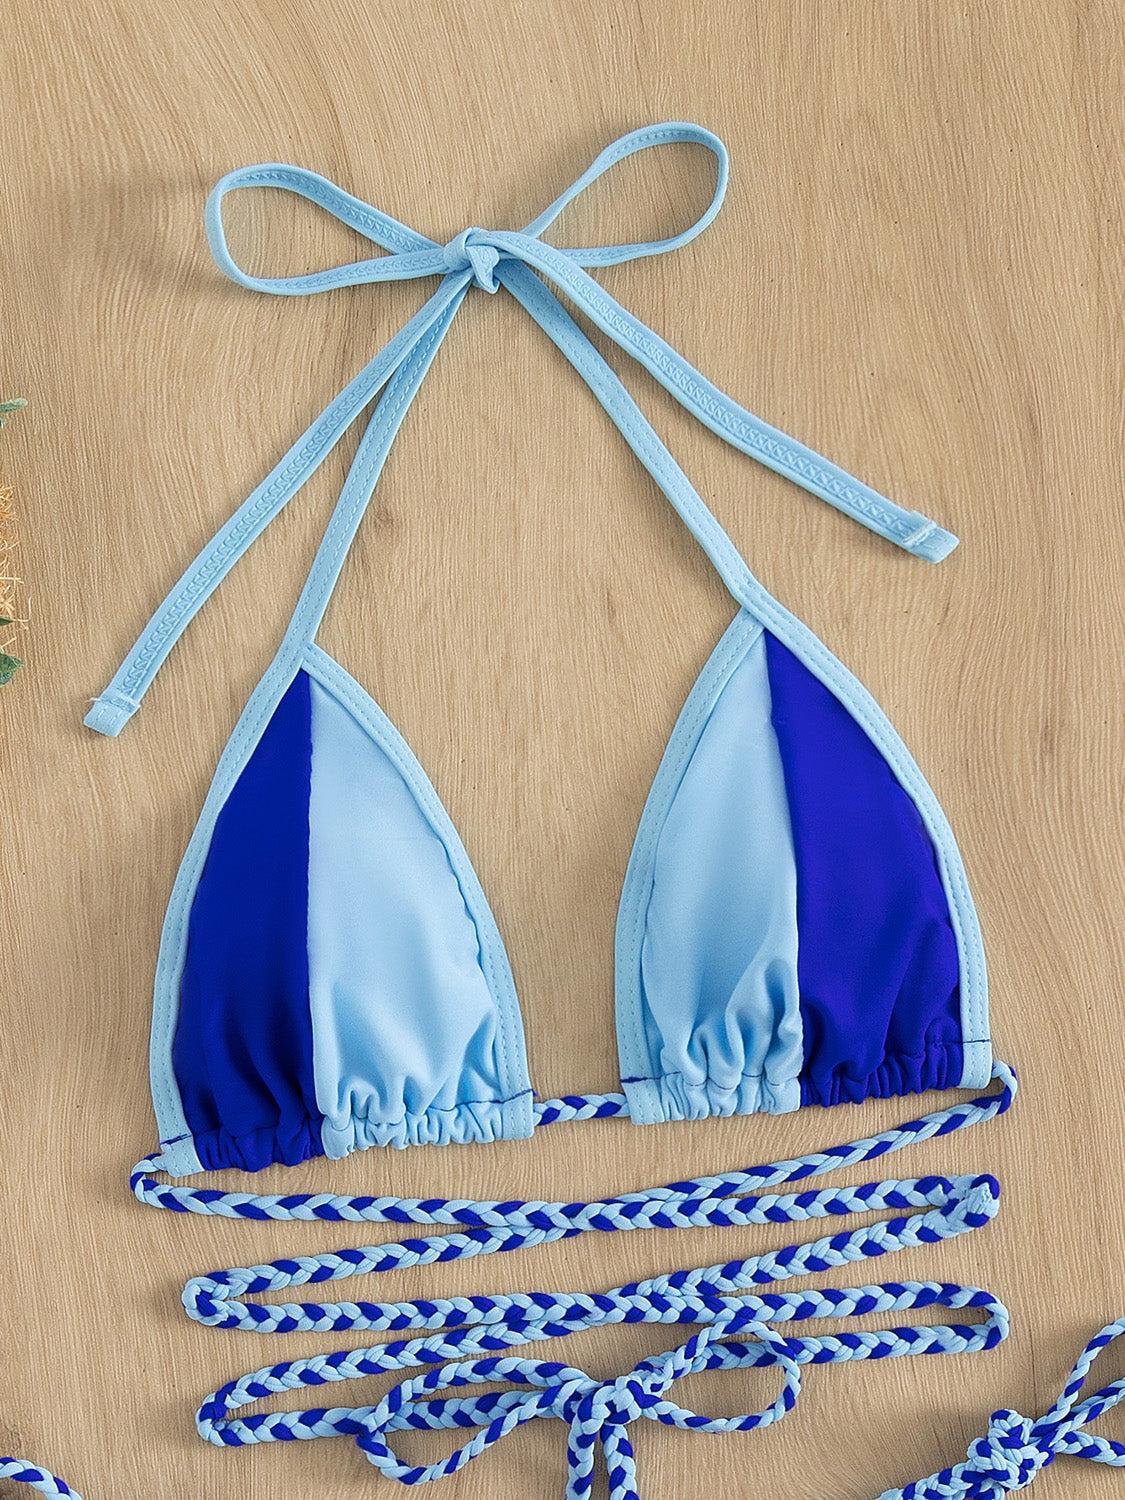 a blue and white bikini top with a knot tied around it